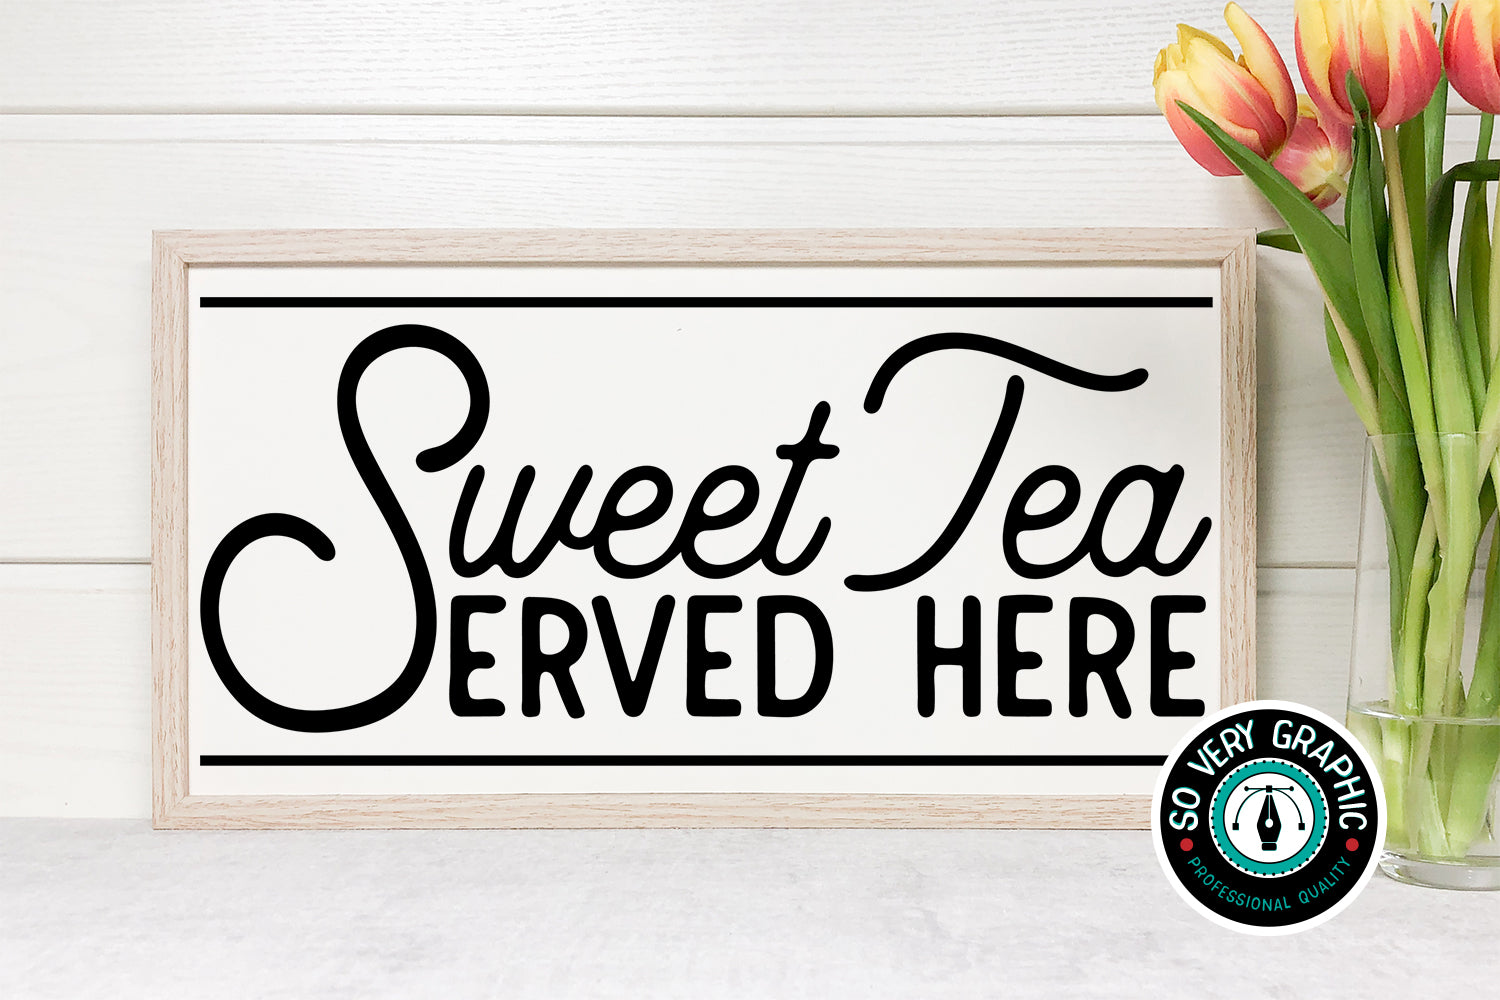 Sweet Tea Served Here Farmhouse Kitchen SVG Cut File for Cricut, Silhouette & ScanNCut machines. Professionally Made Designs for hobby craft & small business use from So Very Graphic. Instant Digital Download